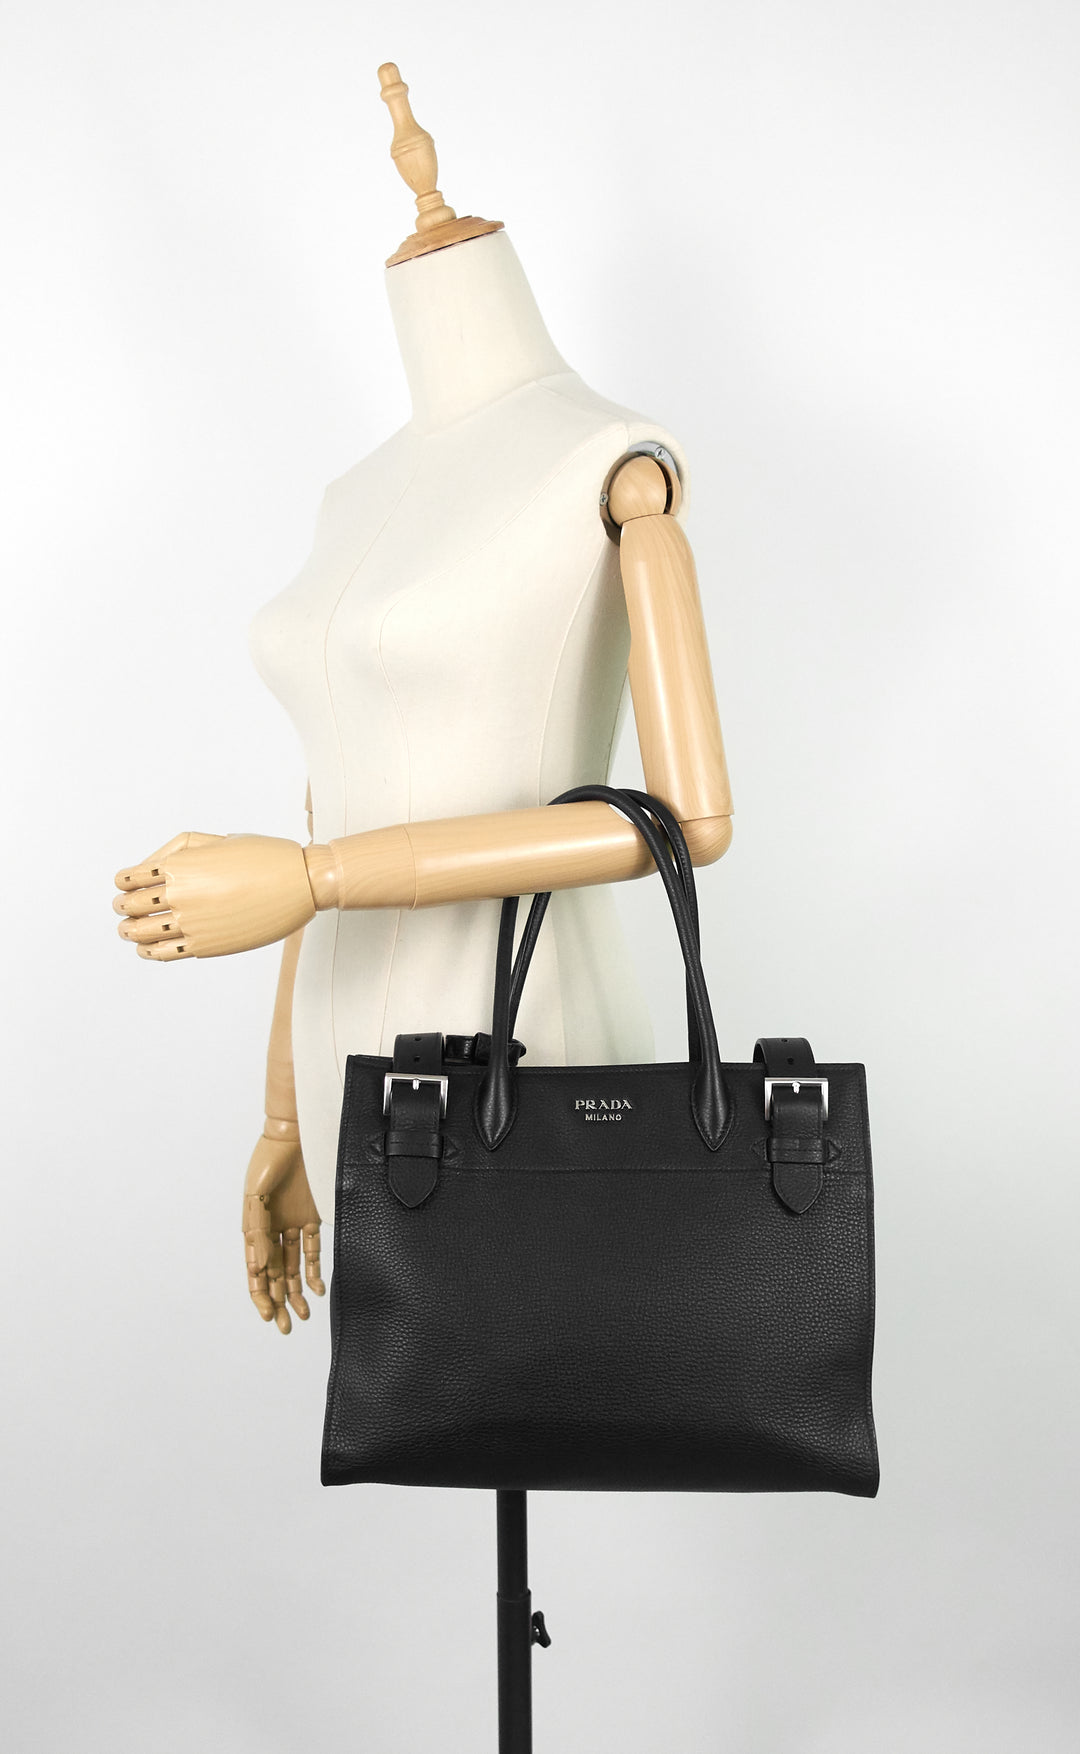 Buckle Leather Tote Bag